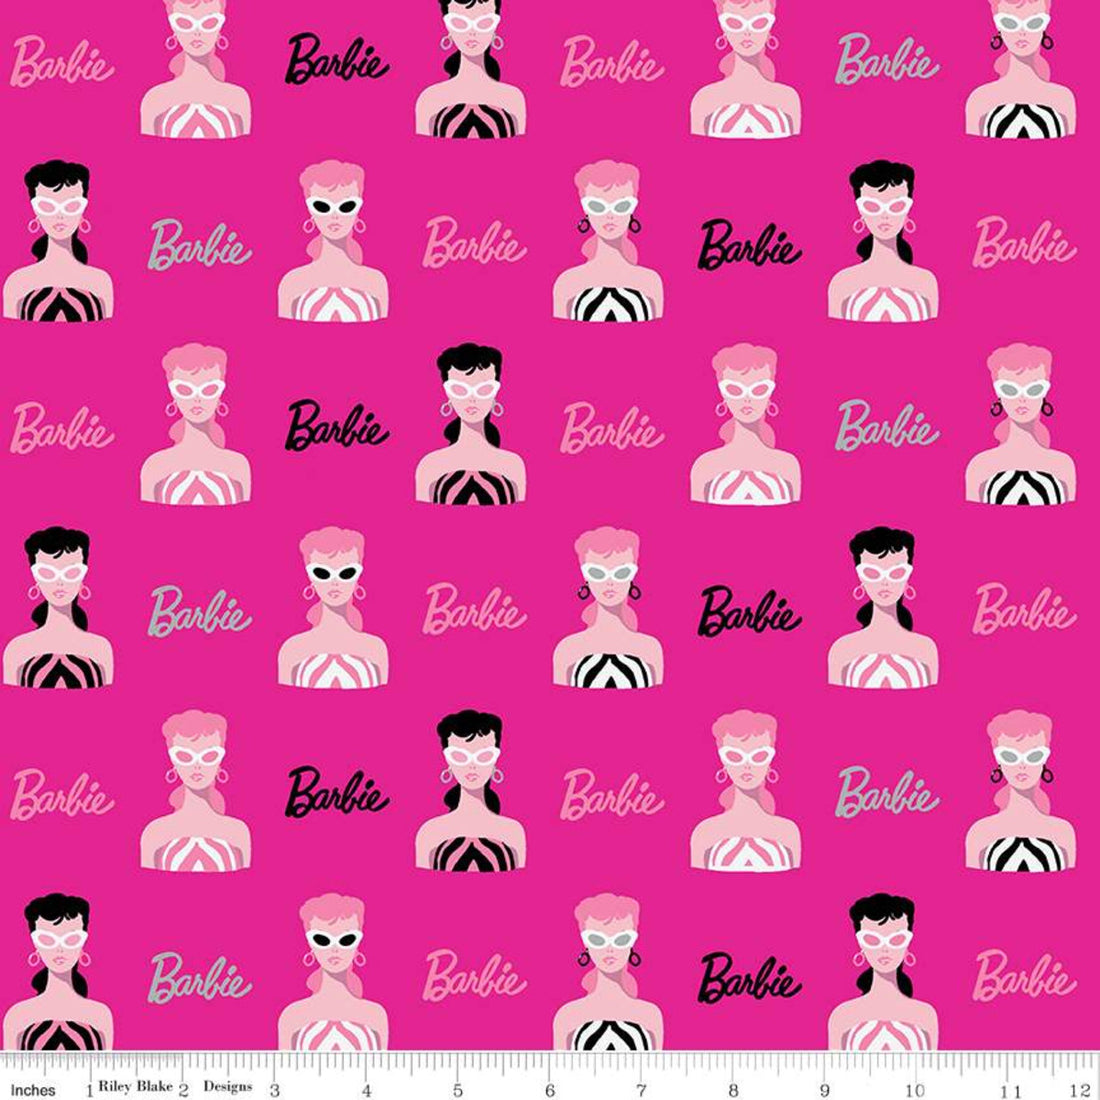 Barbie Fabric Panel and Project Sheet